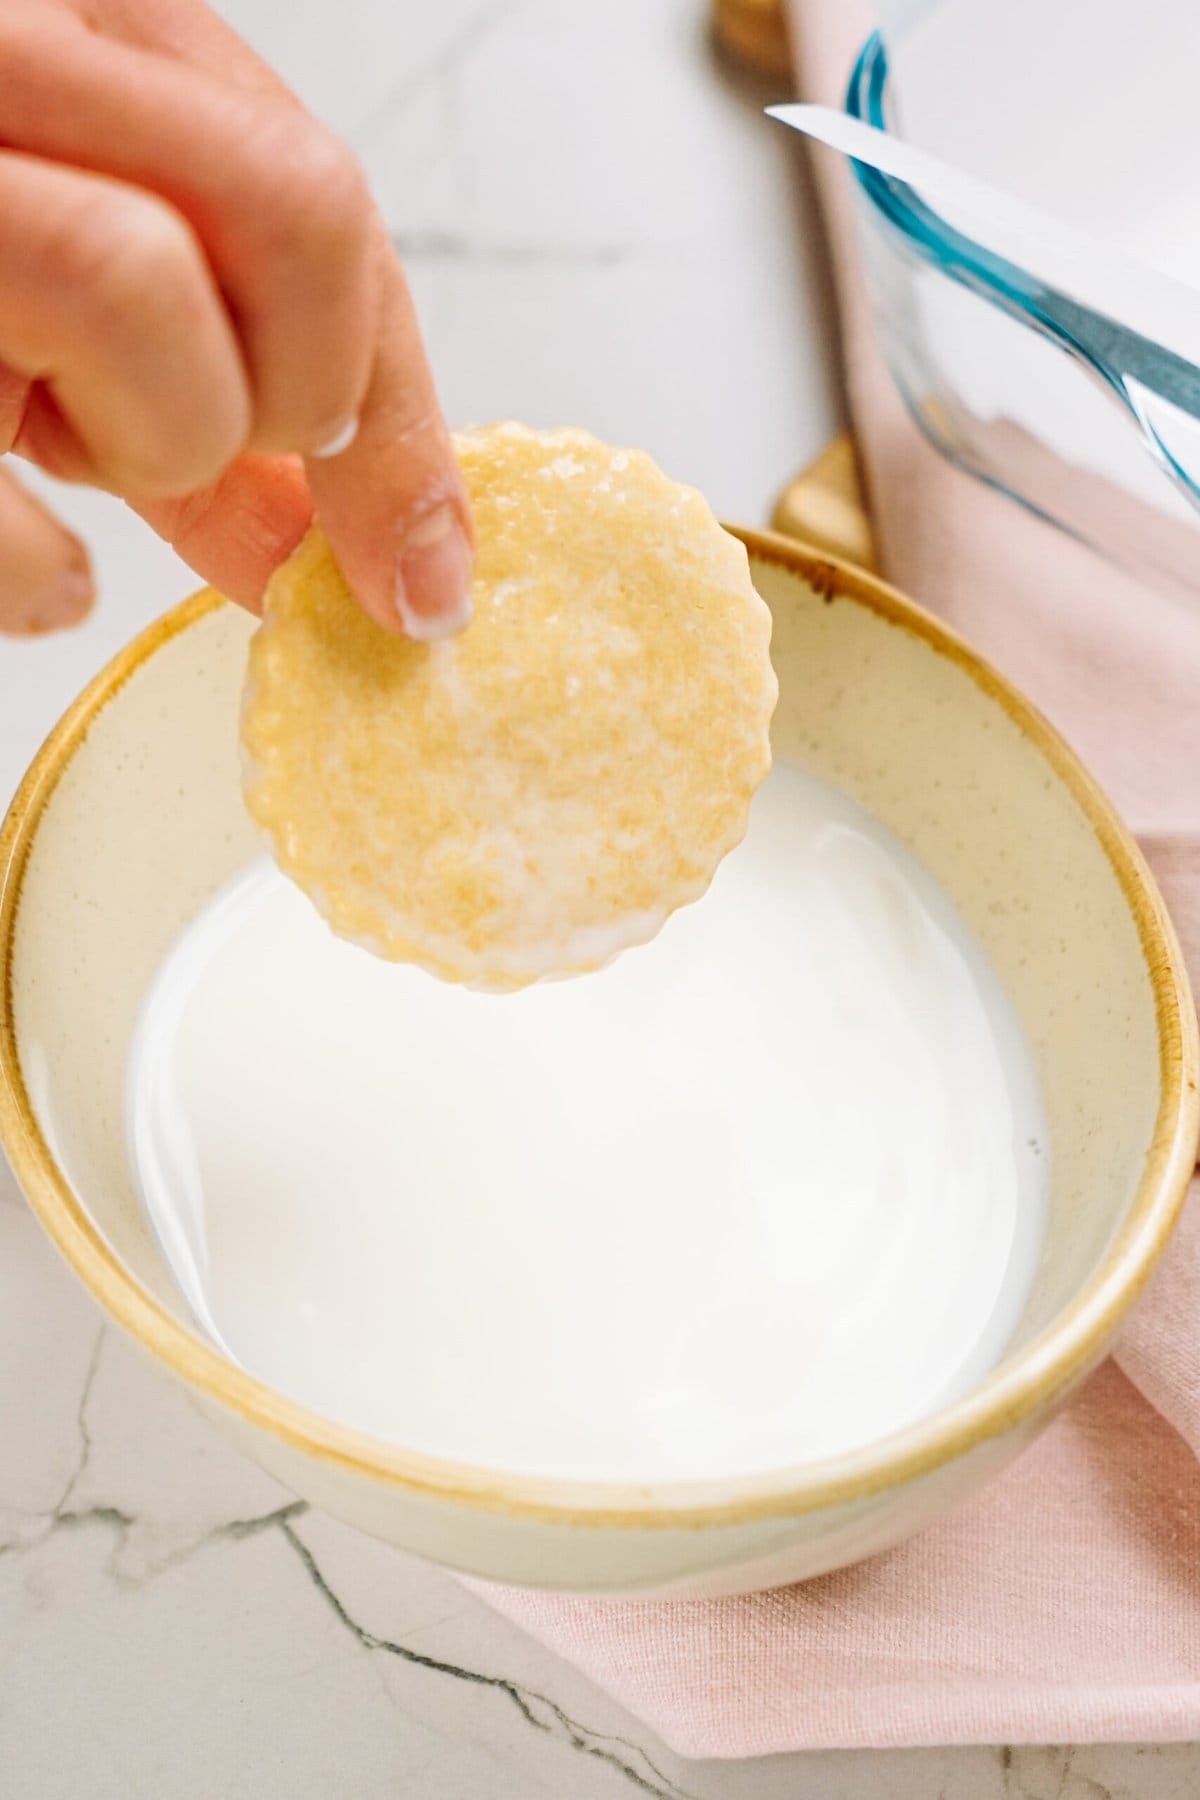 A hand dipping a shortbread cookie into a bowl of milk.